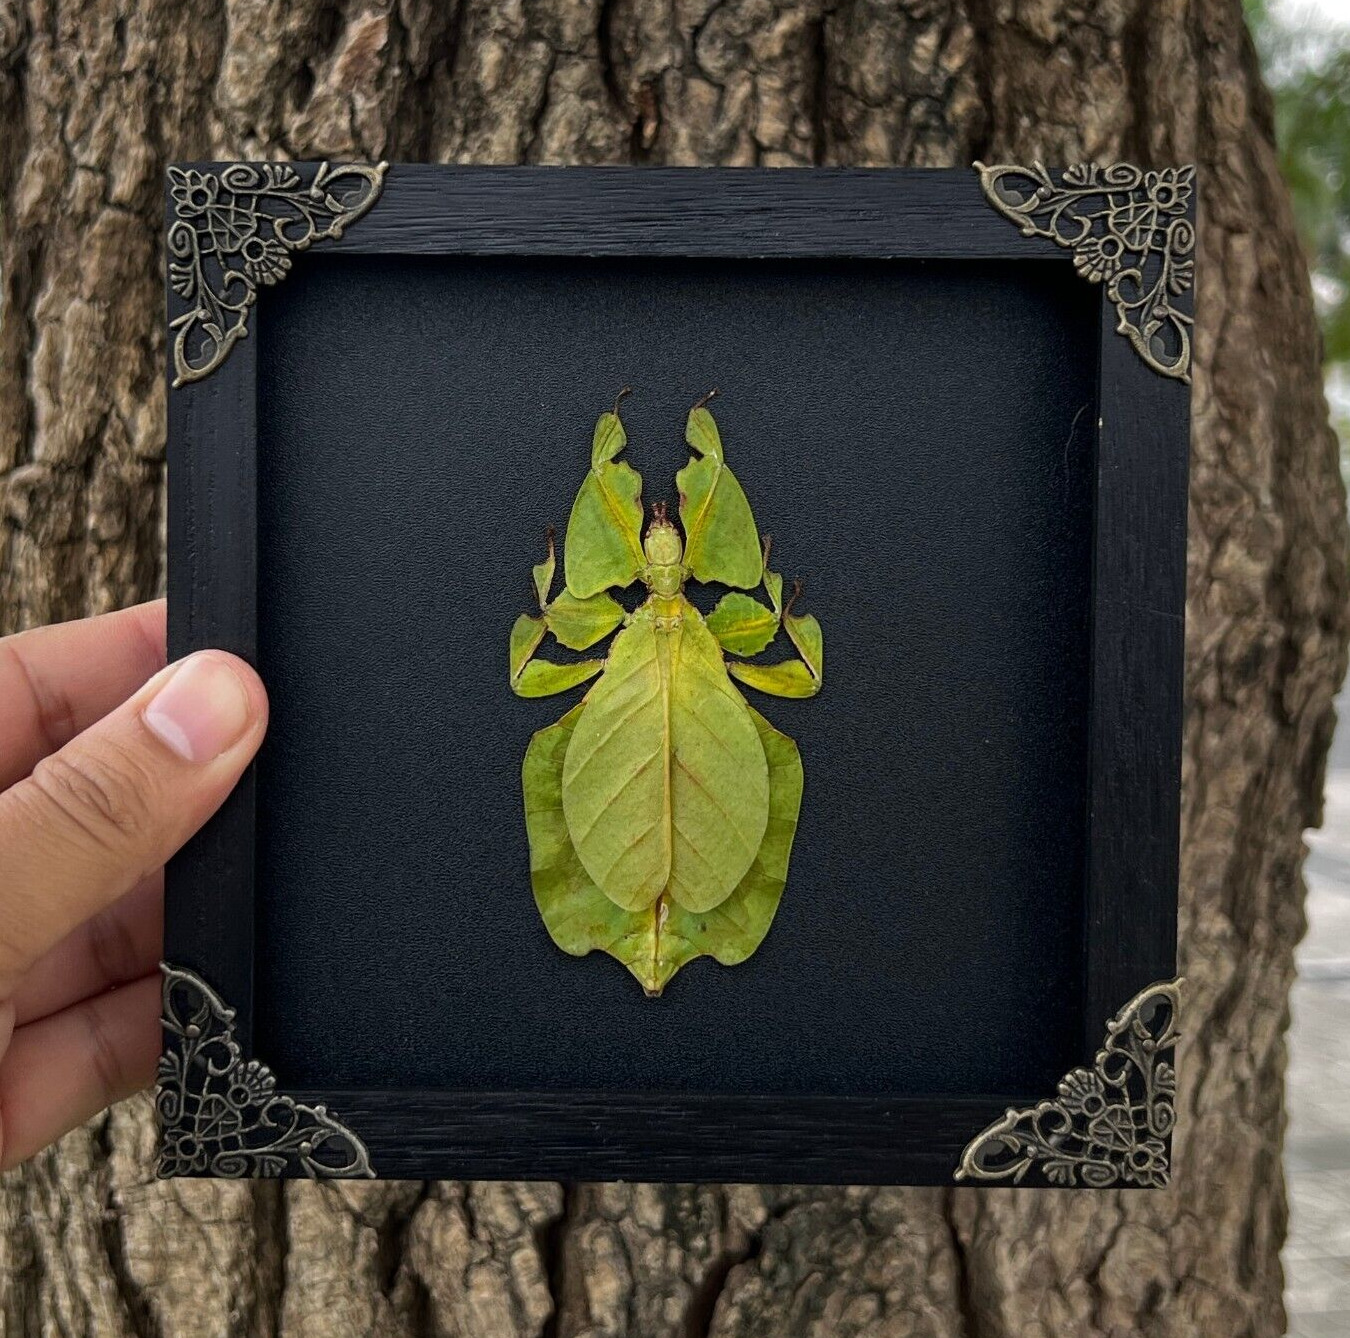 Real Walking Leaf Insect Framed Taxidermy Bugs Wall Hanging Decor Gift for Kids